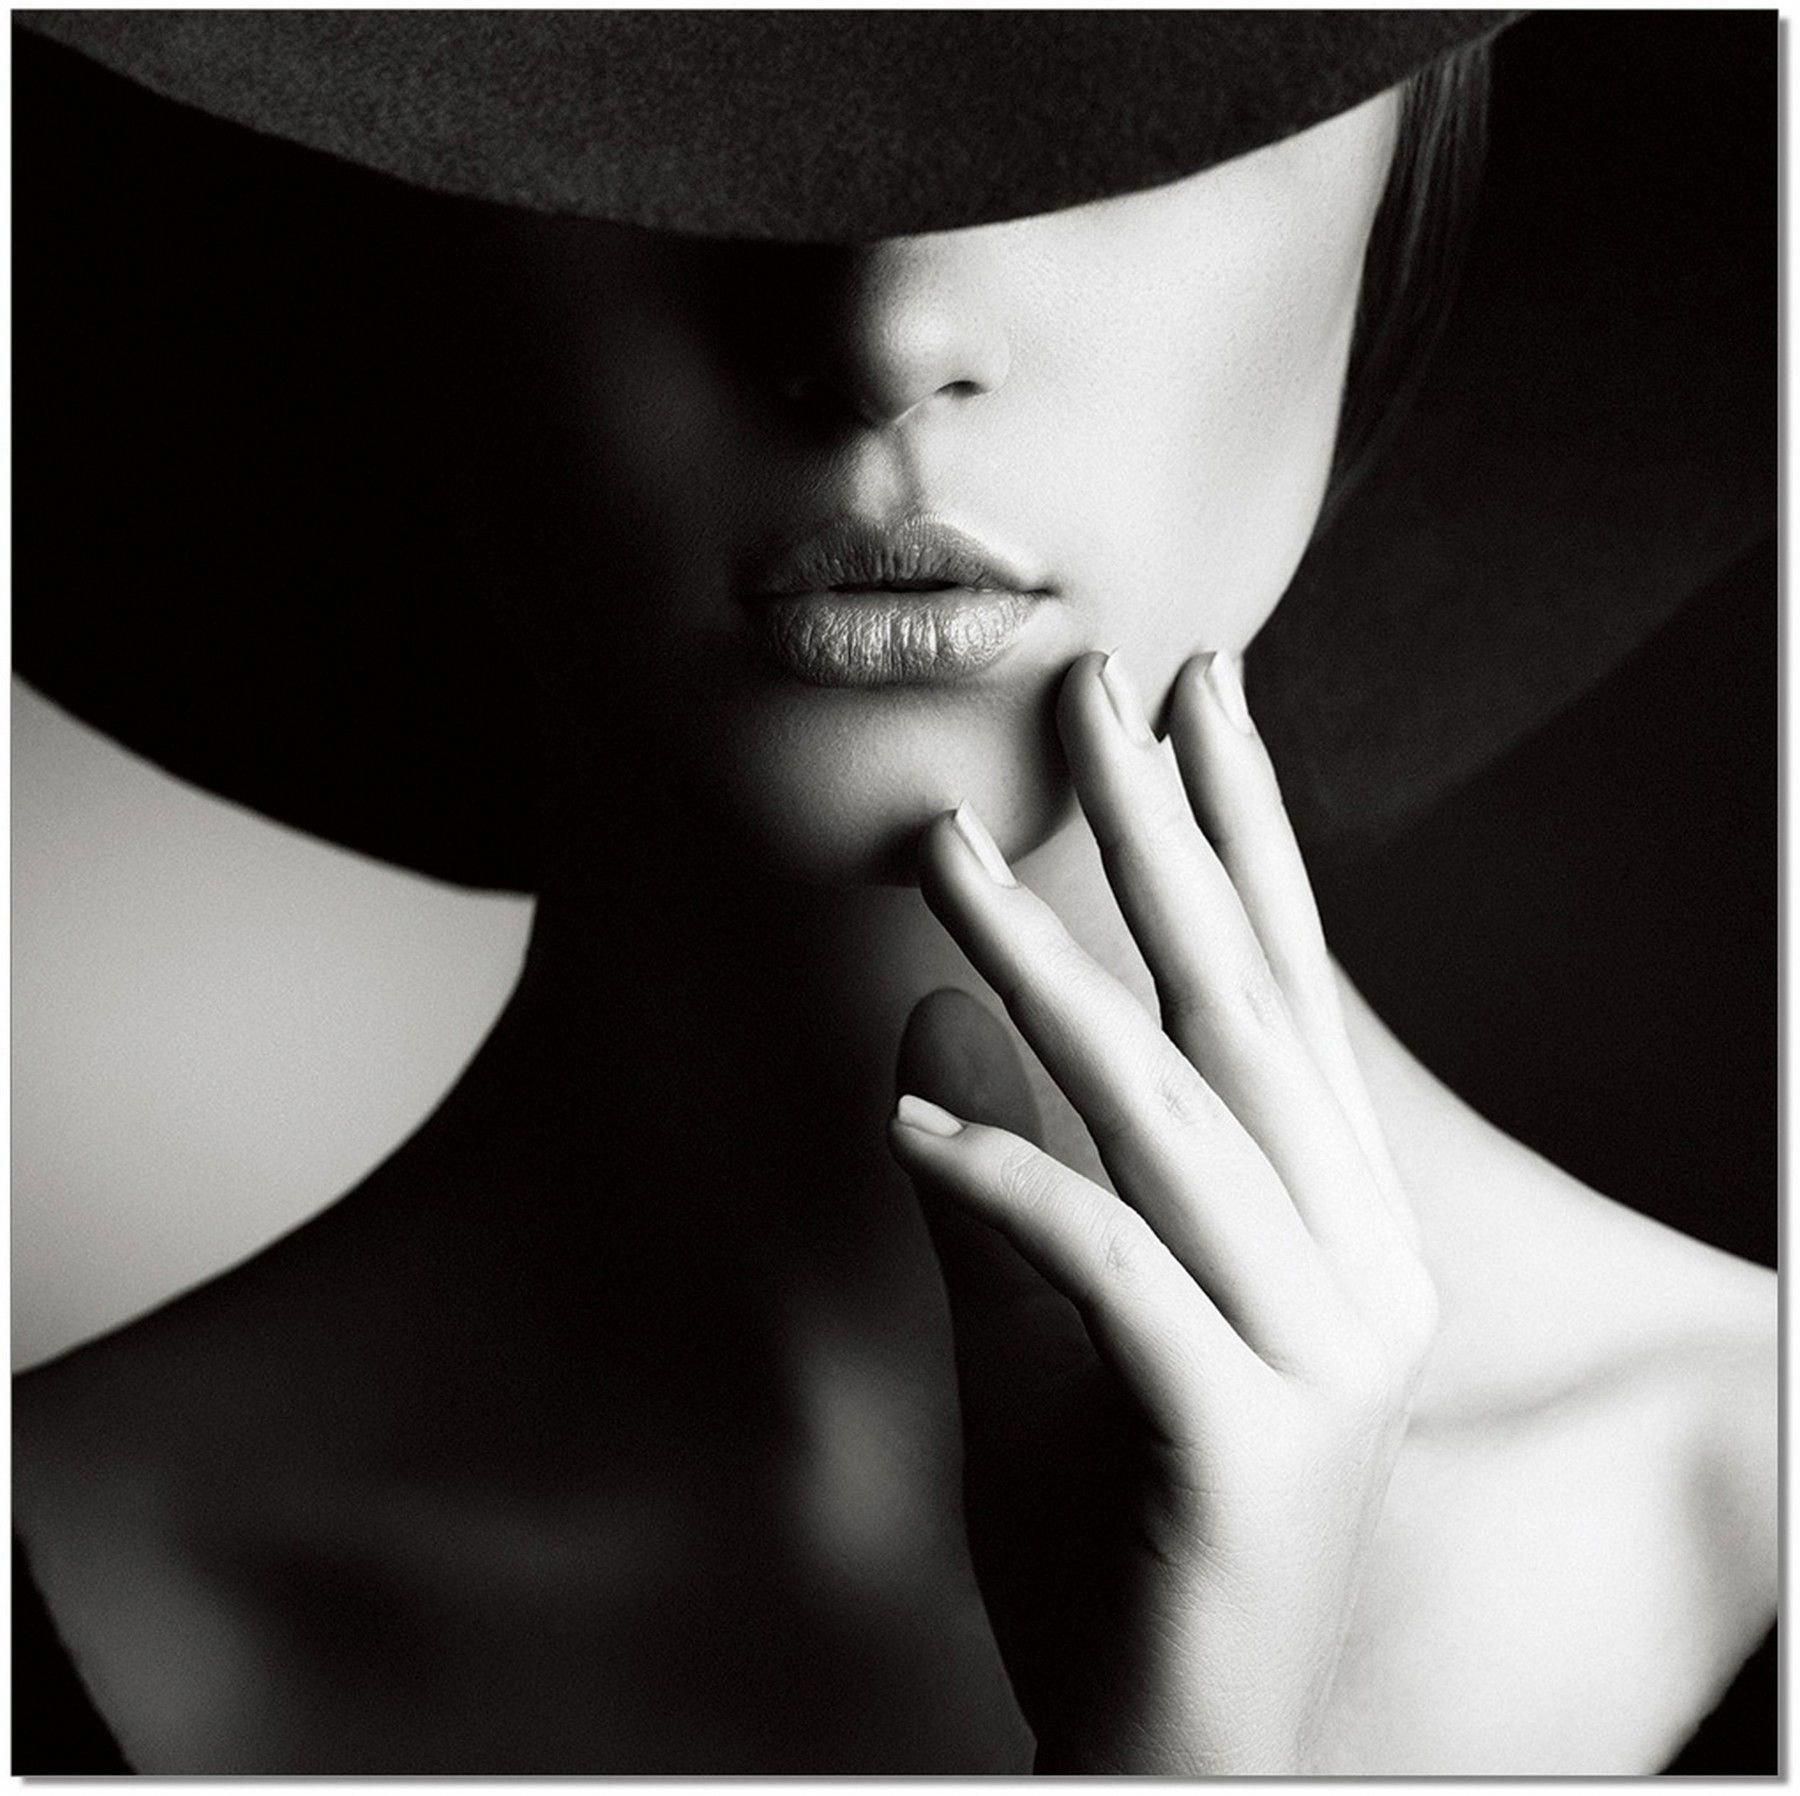 16 beauty Photography black and white ideas